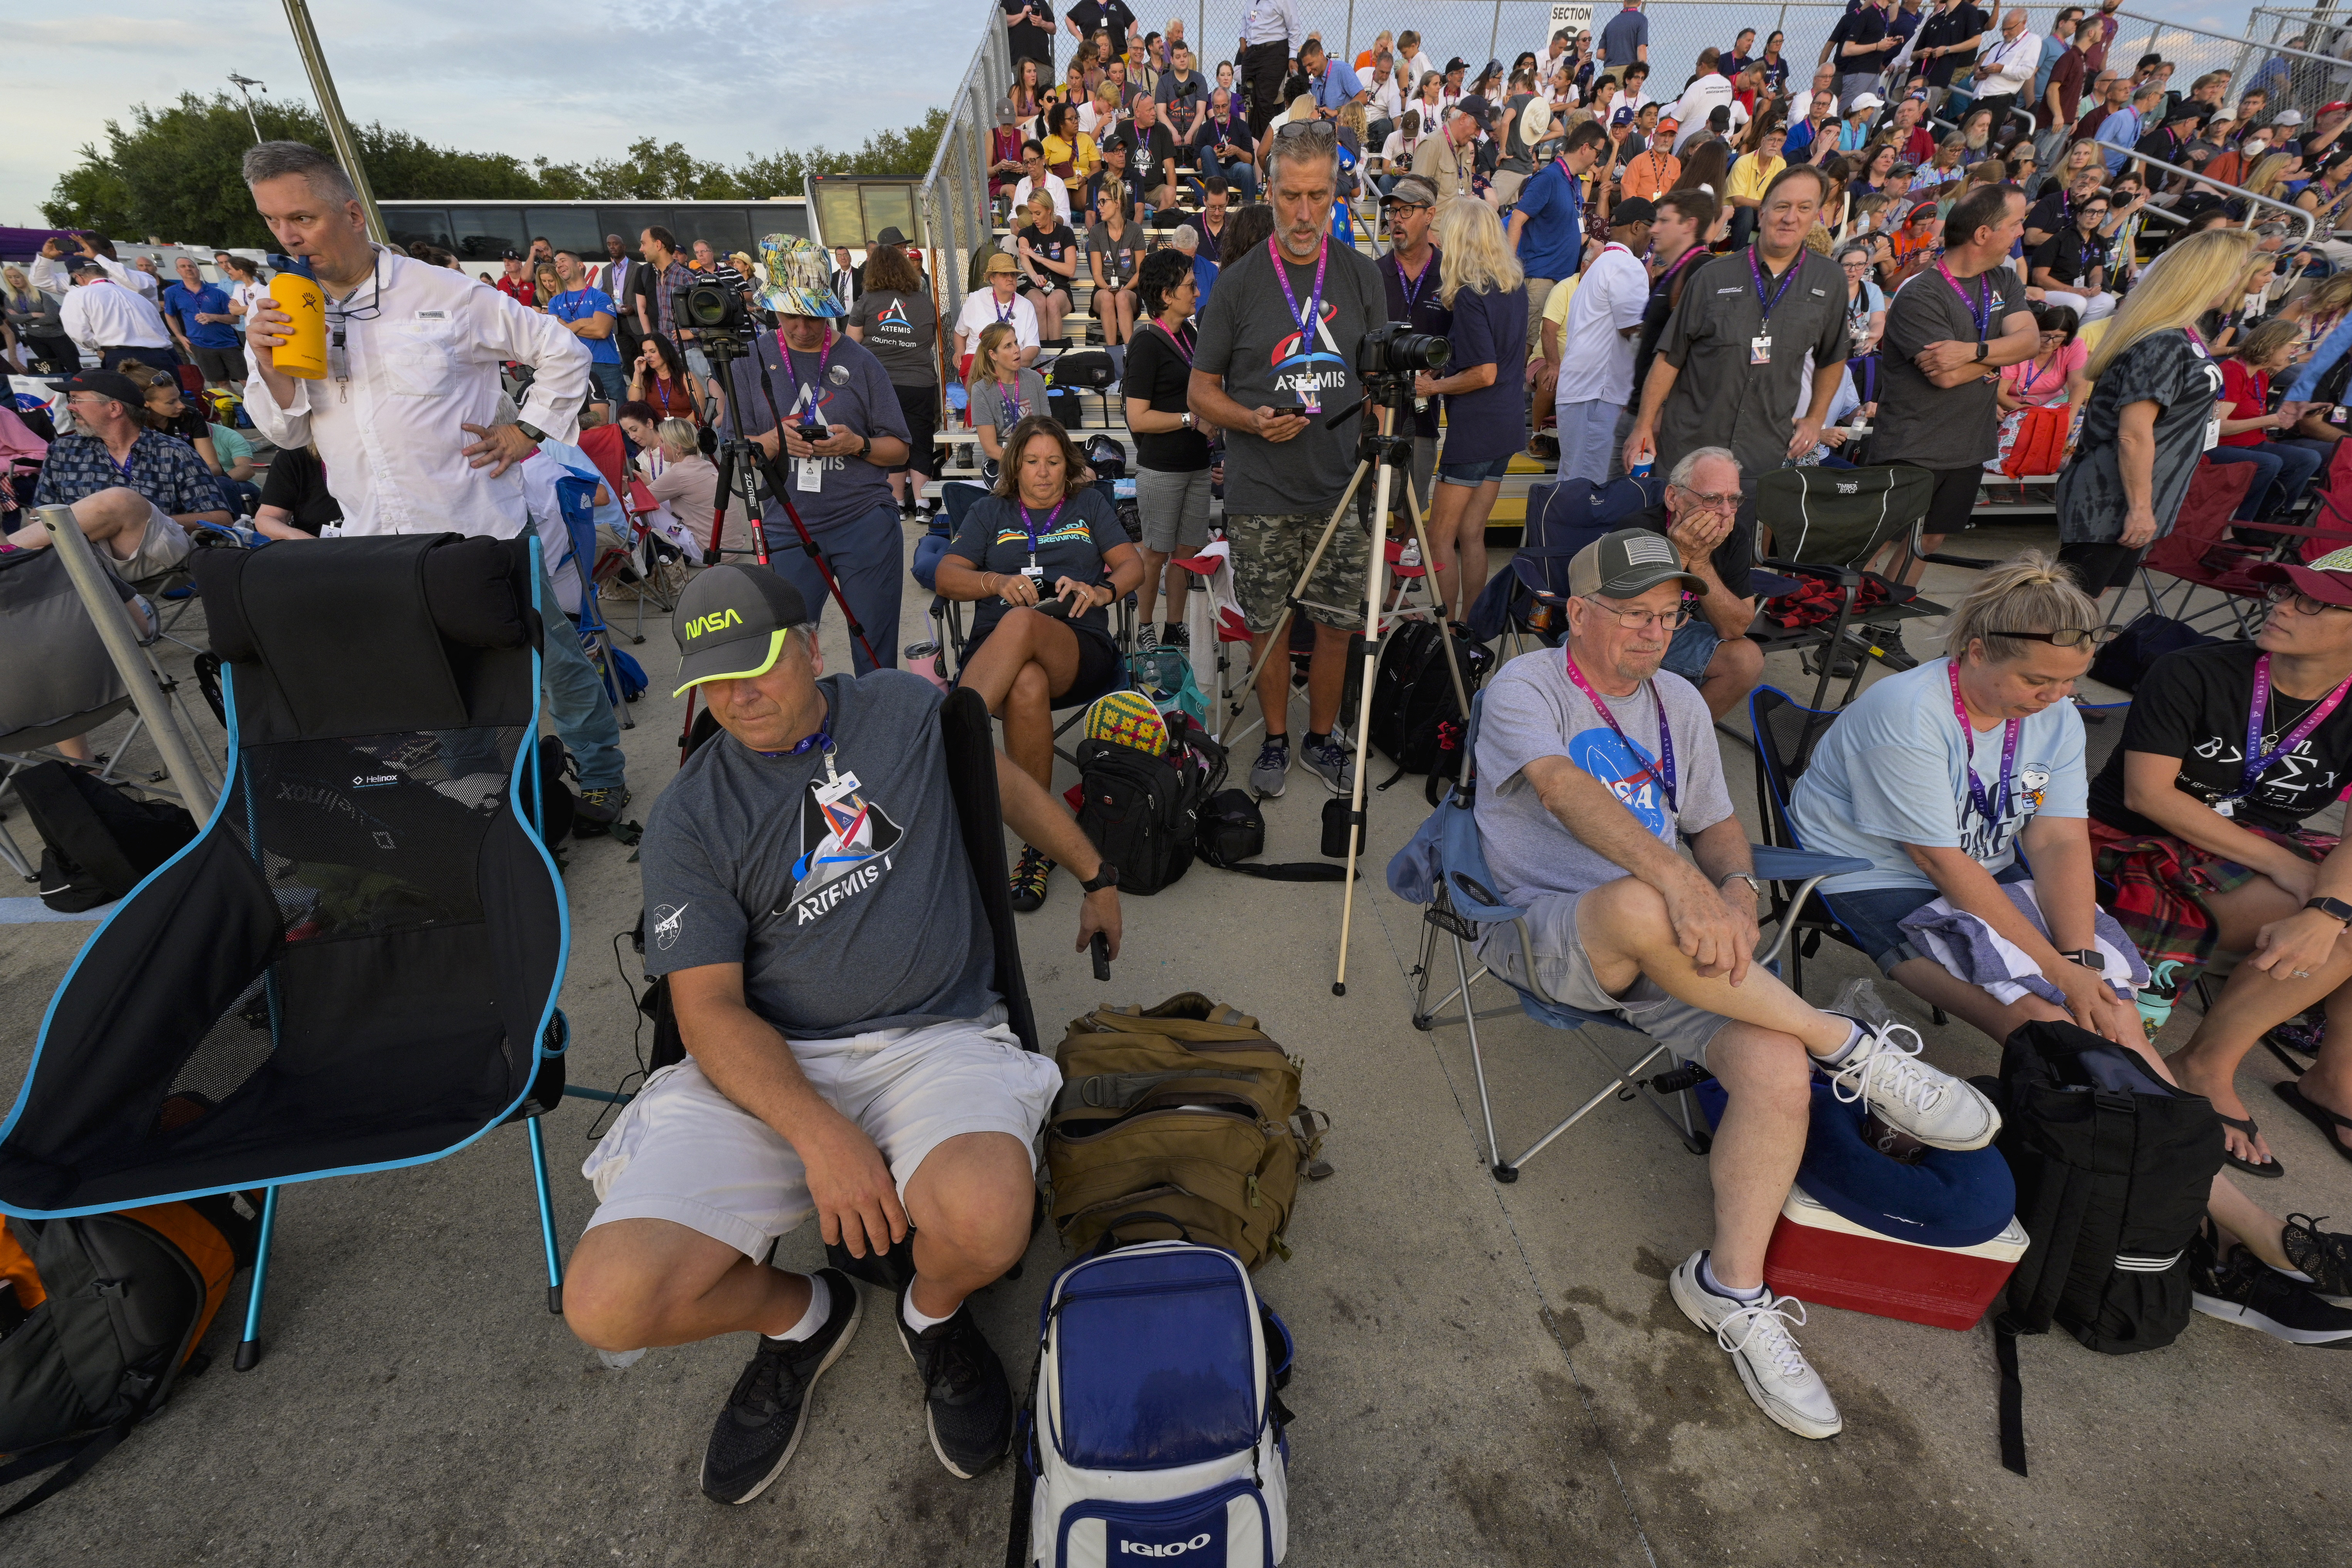 Spectators wait for the launch of NASA's next-generation moon rocket, the Space Launch System (SLS) , with its Orion crew capsule on top, on the unmanned Artemis 1 mission, which was later scrubbed, at Cape Canaveral, Florida, U.S., August 29, 2022. REUTERS/Steve Nesius